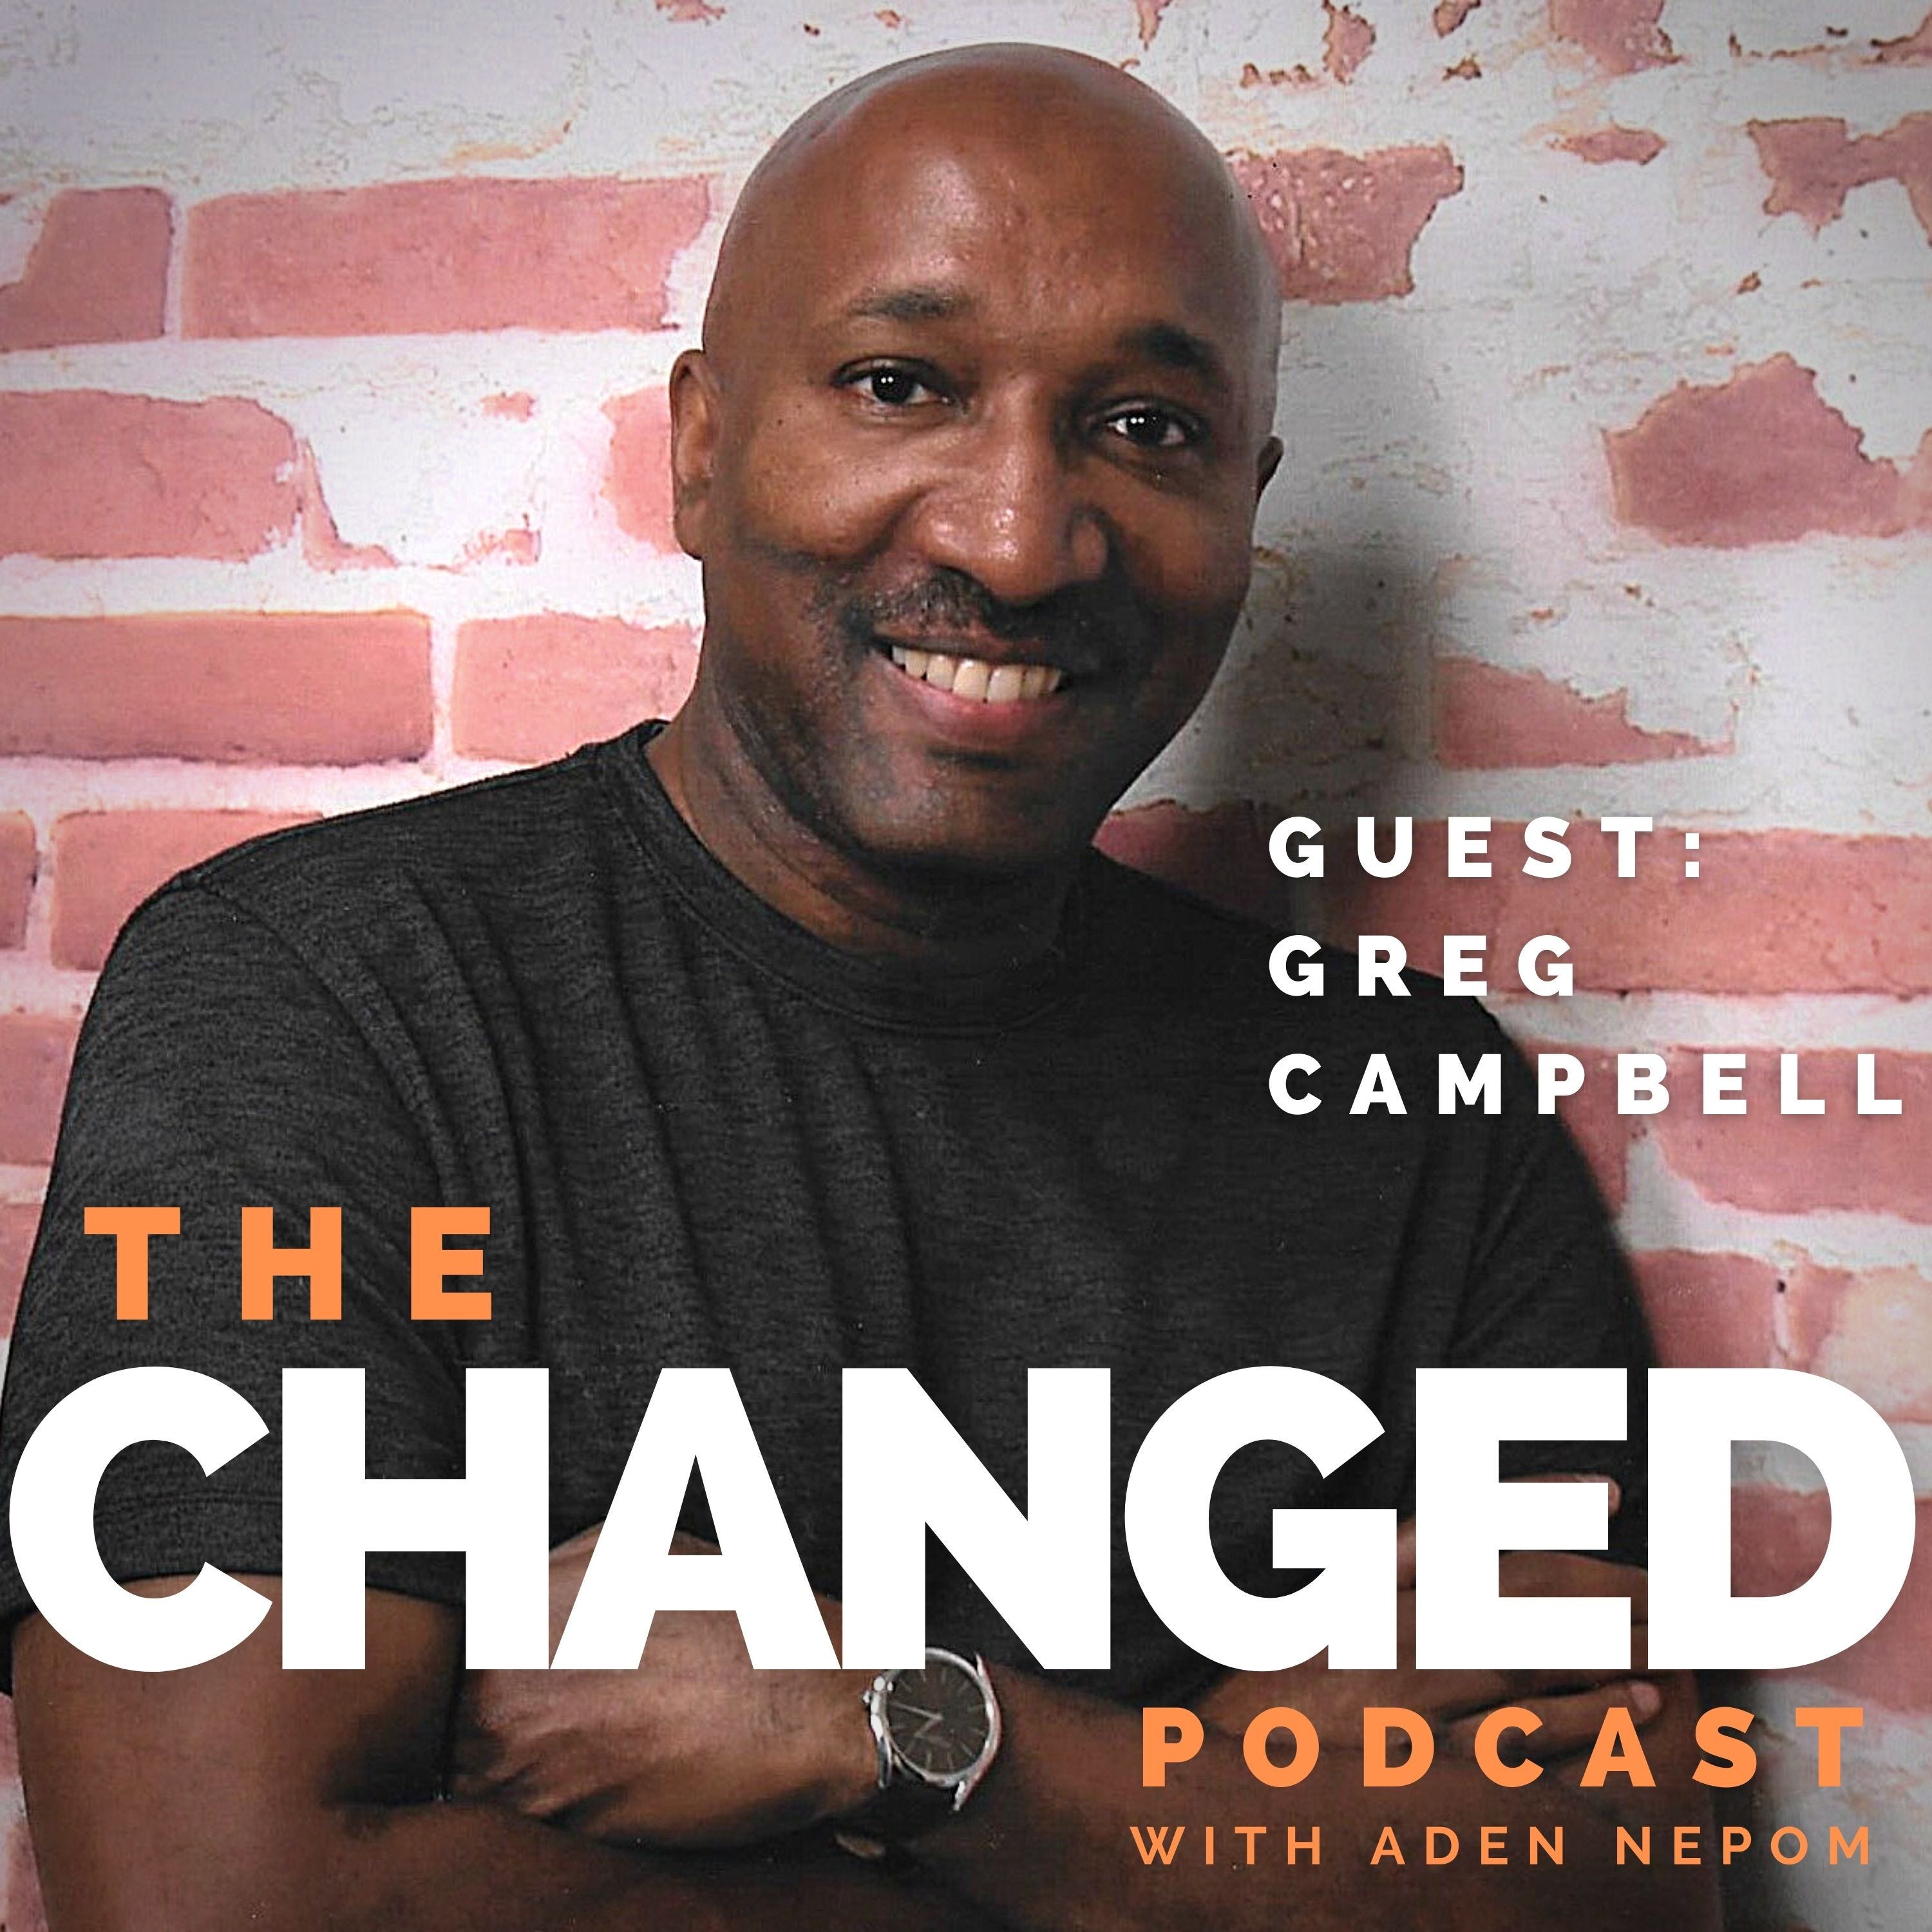 Greg Campbell and the Importance of the people we meet – Episode 46